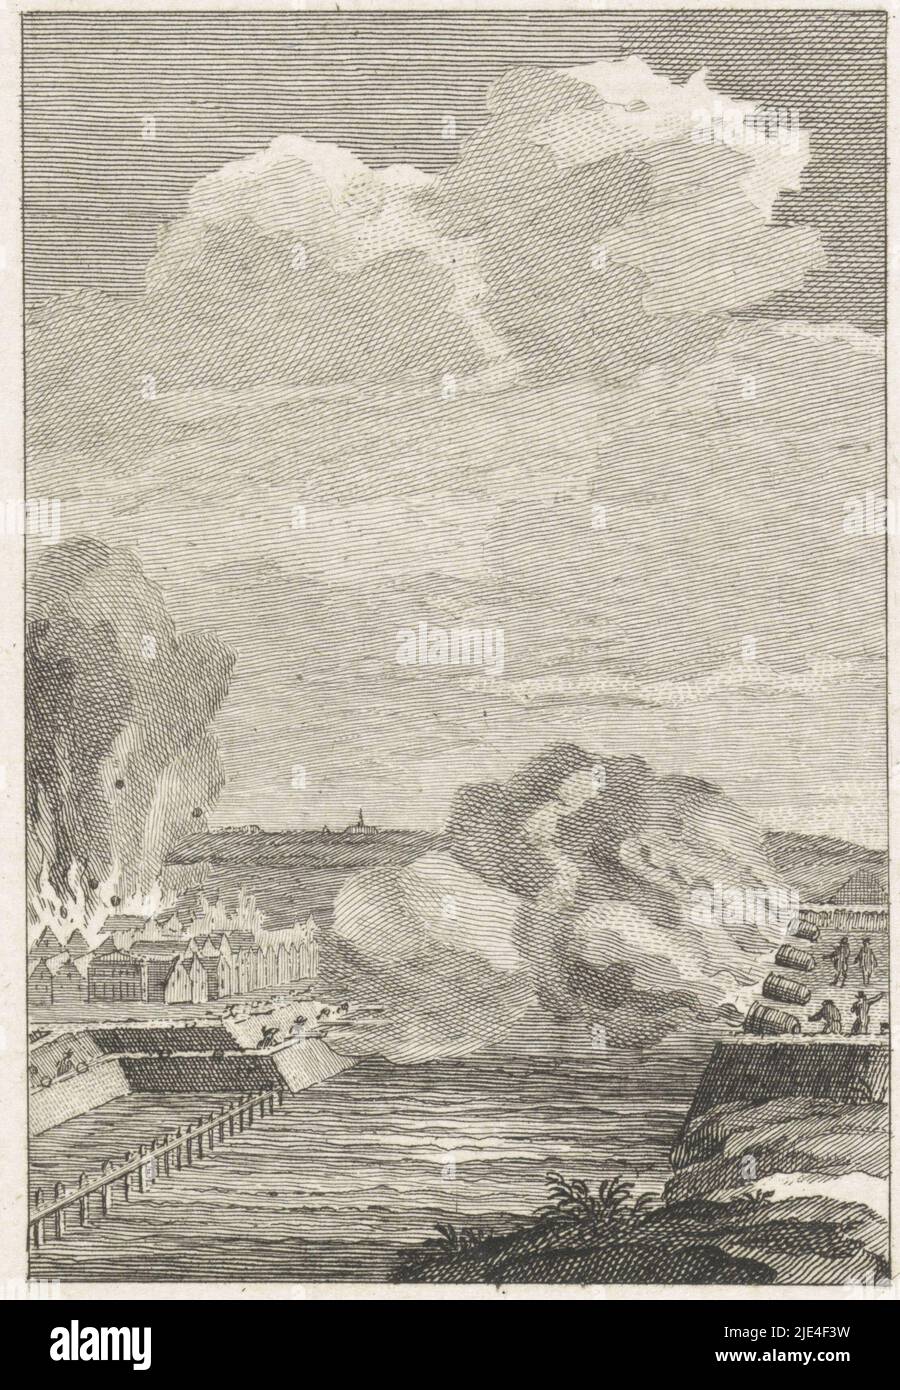 Bombardment of Venlo, 1793, Cornelis Bogerts, after Jacobus Buys, 1793 - 1795, Bombardment of Venlo by the French army, 17-20 February 1793. With handwritten inscription., print maker: Cornelis Bogerts, intermediary draughtsman: Jacobus Buys, Northern Netherlands, 1793 - 1795, paper, etching, engraving, h 164 mm × w 115 mm Stock Photo